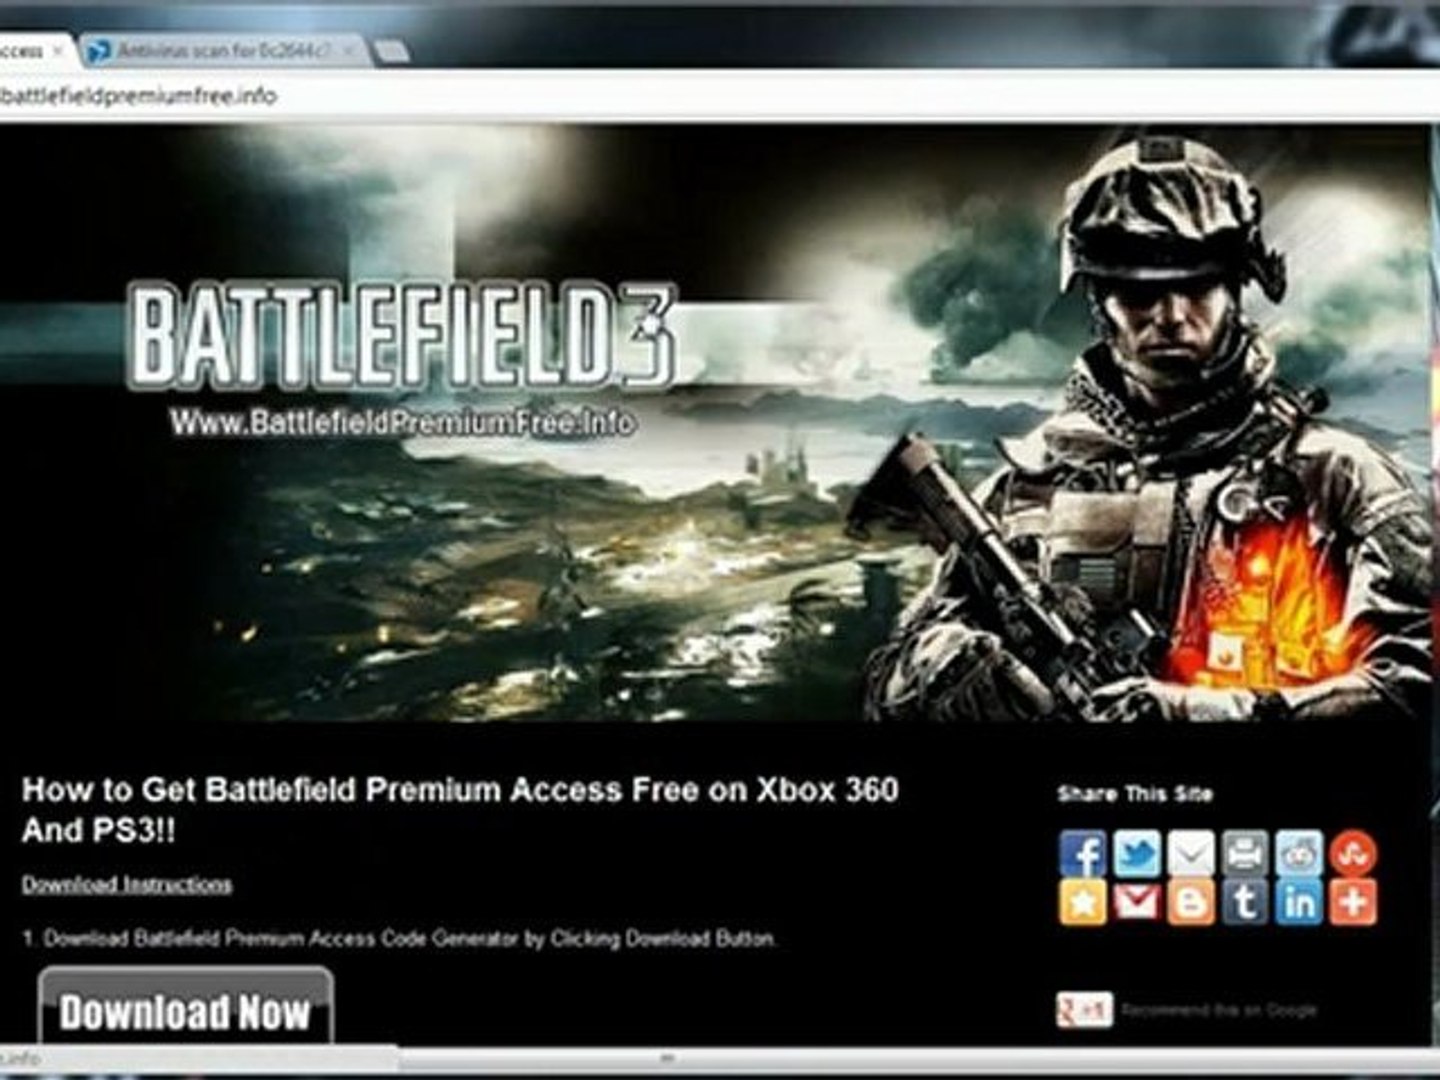 Battlefield 3 Premium Access Codes Free Giveaway - Xbox 360 PS3 - video  Dailymotion